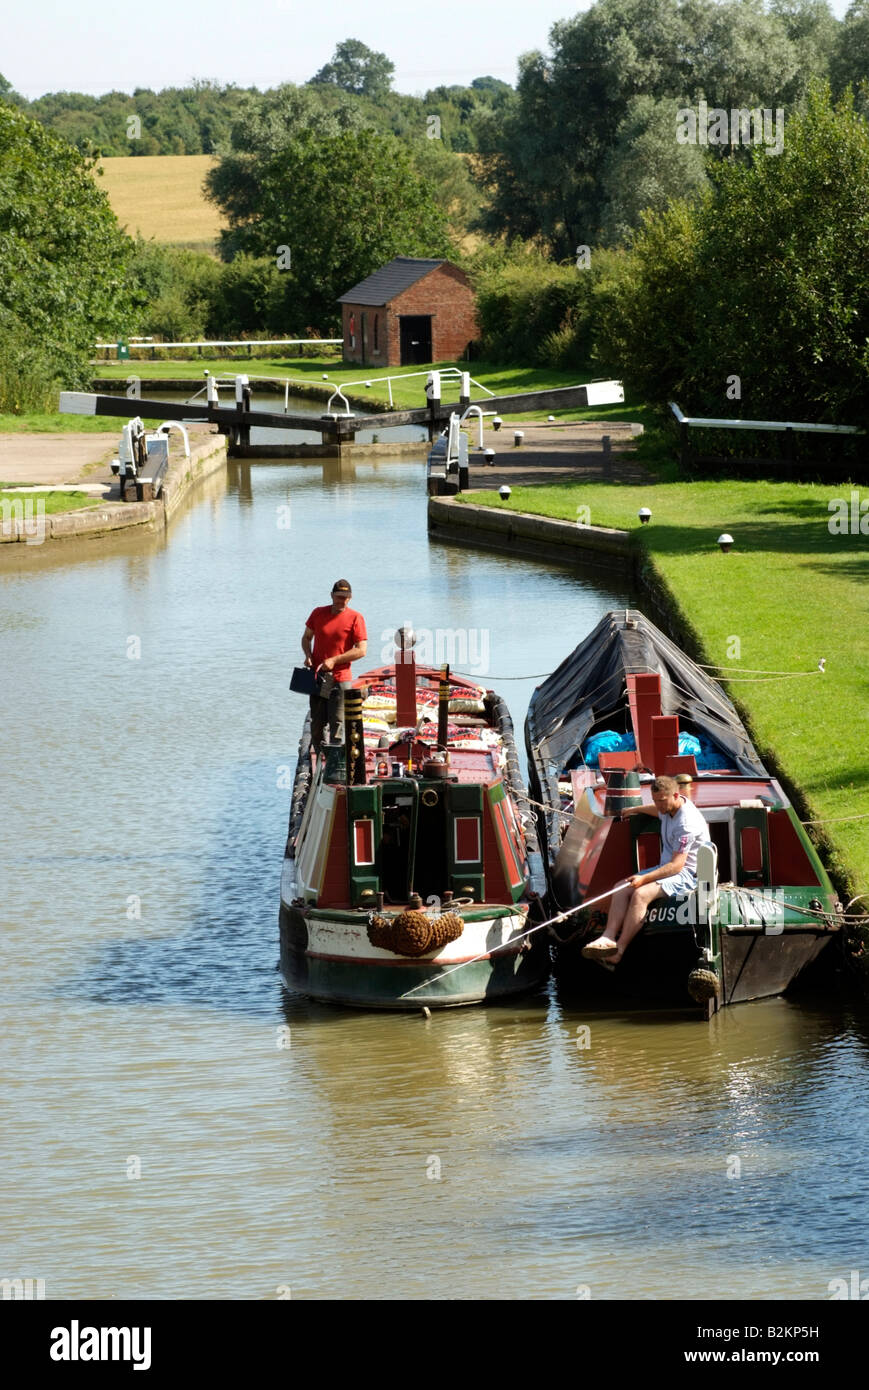 Working canal boats on the Grand Union Canal at Stoke Bruerne in the English countryside Northamptonshire England Stock Photo